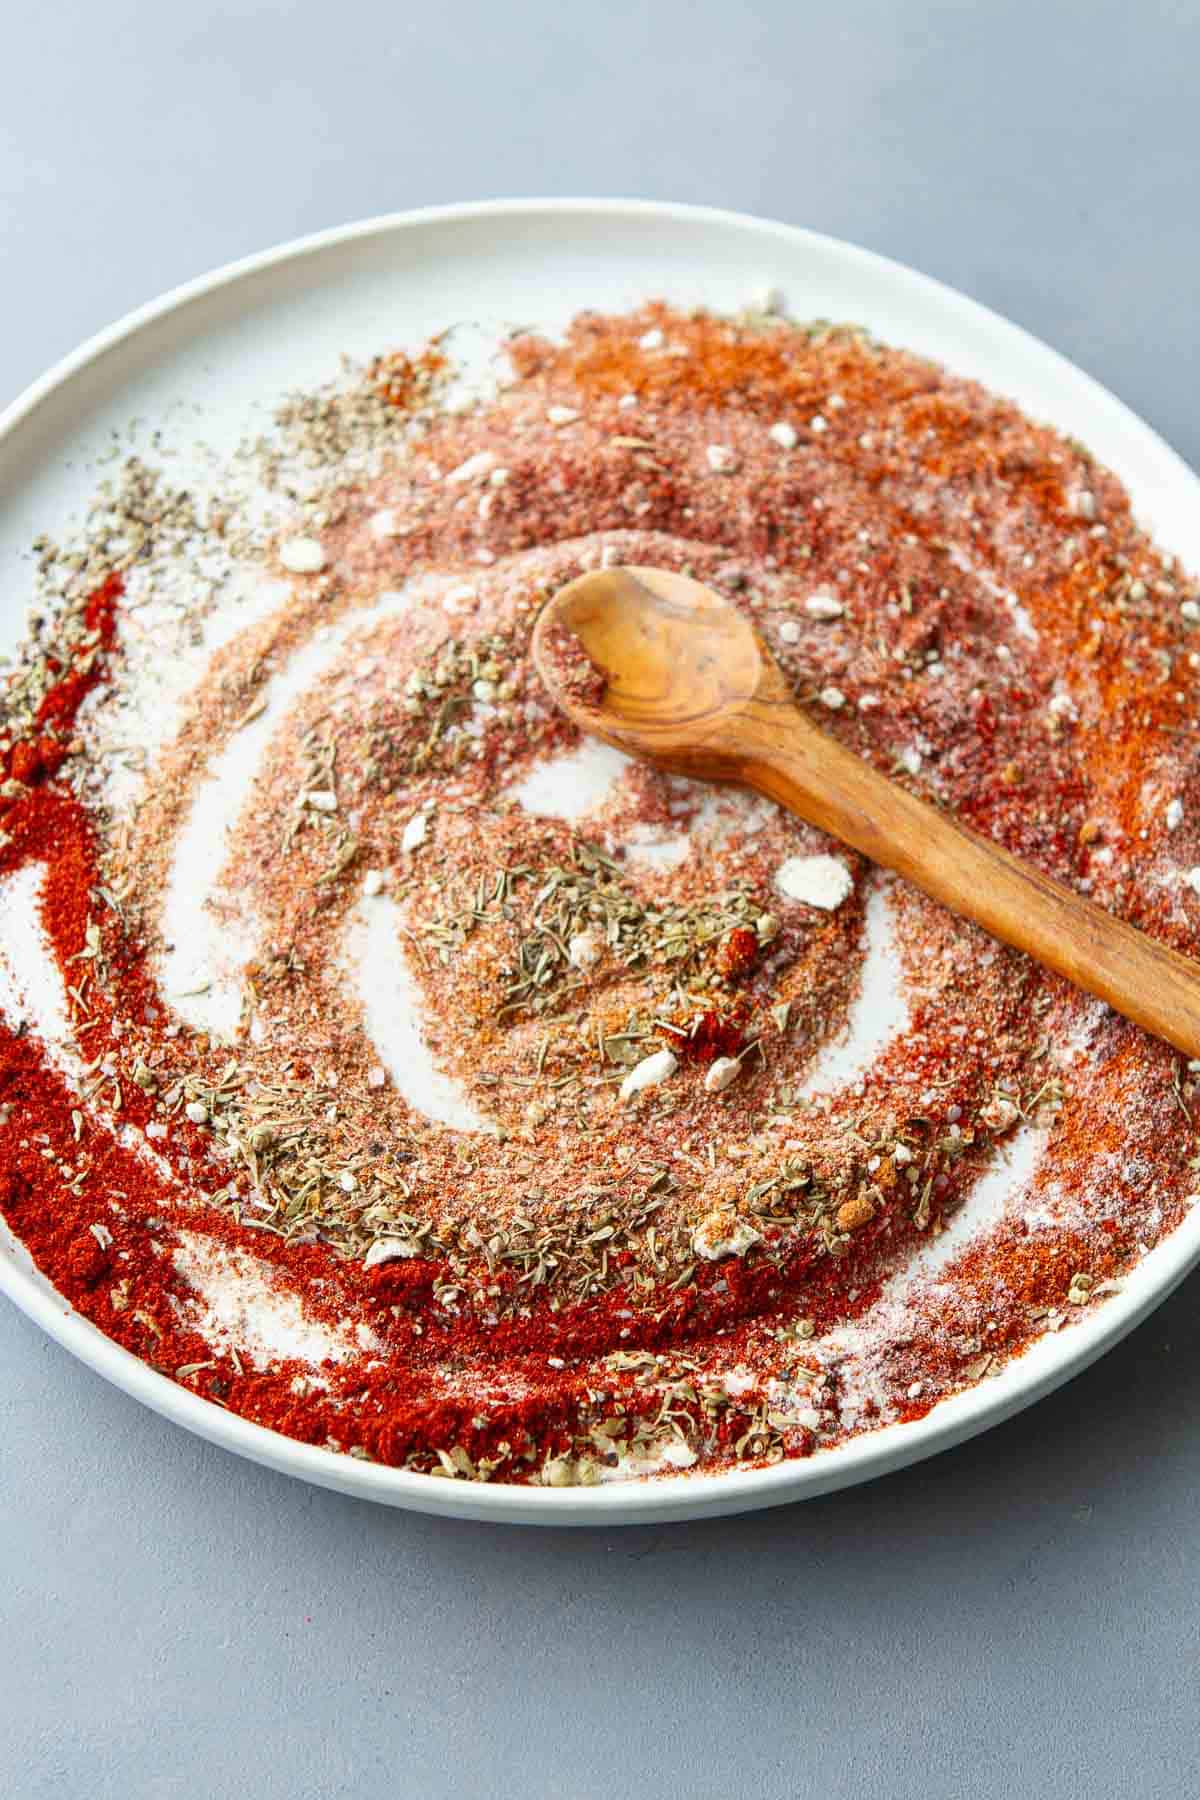 Jazz up your dishes with blackening seasoning – a potent mix of smoked paprika, garlic, and other herbs and spices that adds depth and heat to chicken, fish, and vegetables.